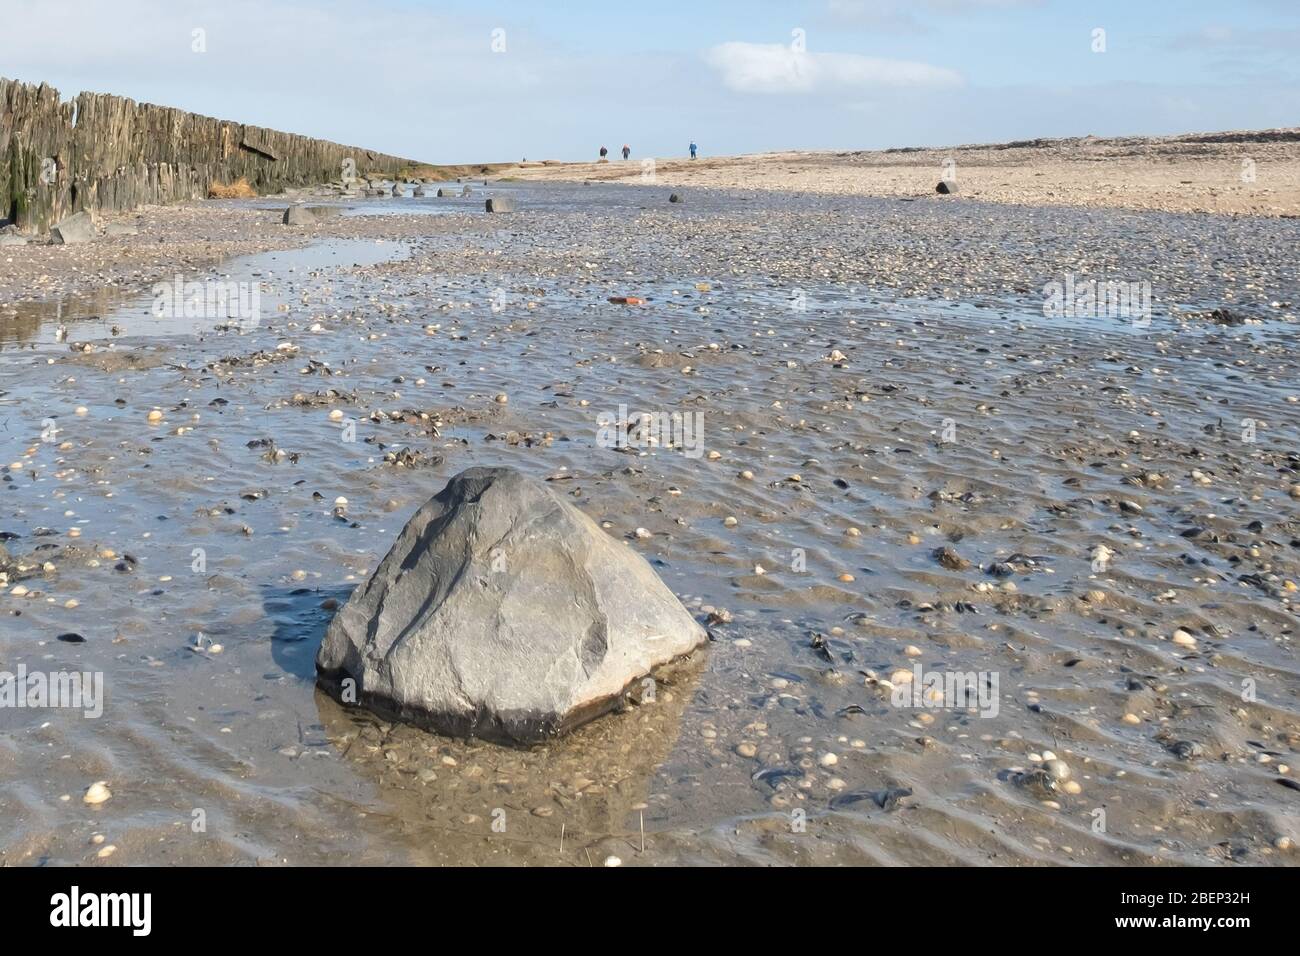 A soothing picture of the wadden sea at paesens moddergat, big rock in foreground, sea and sky, people in the distance. Stock Photo